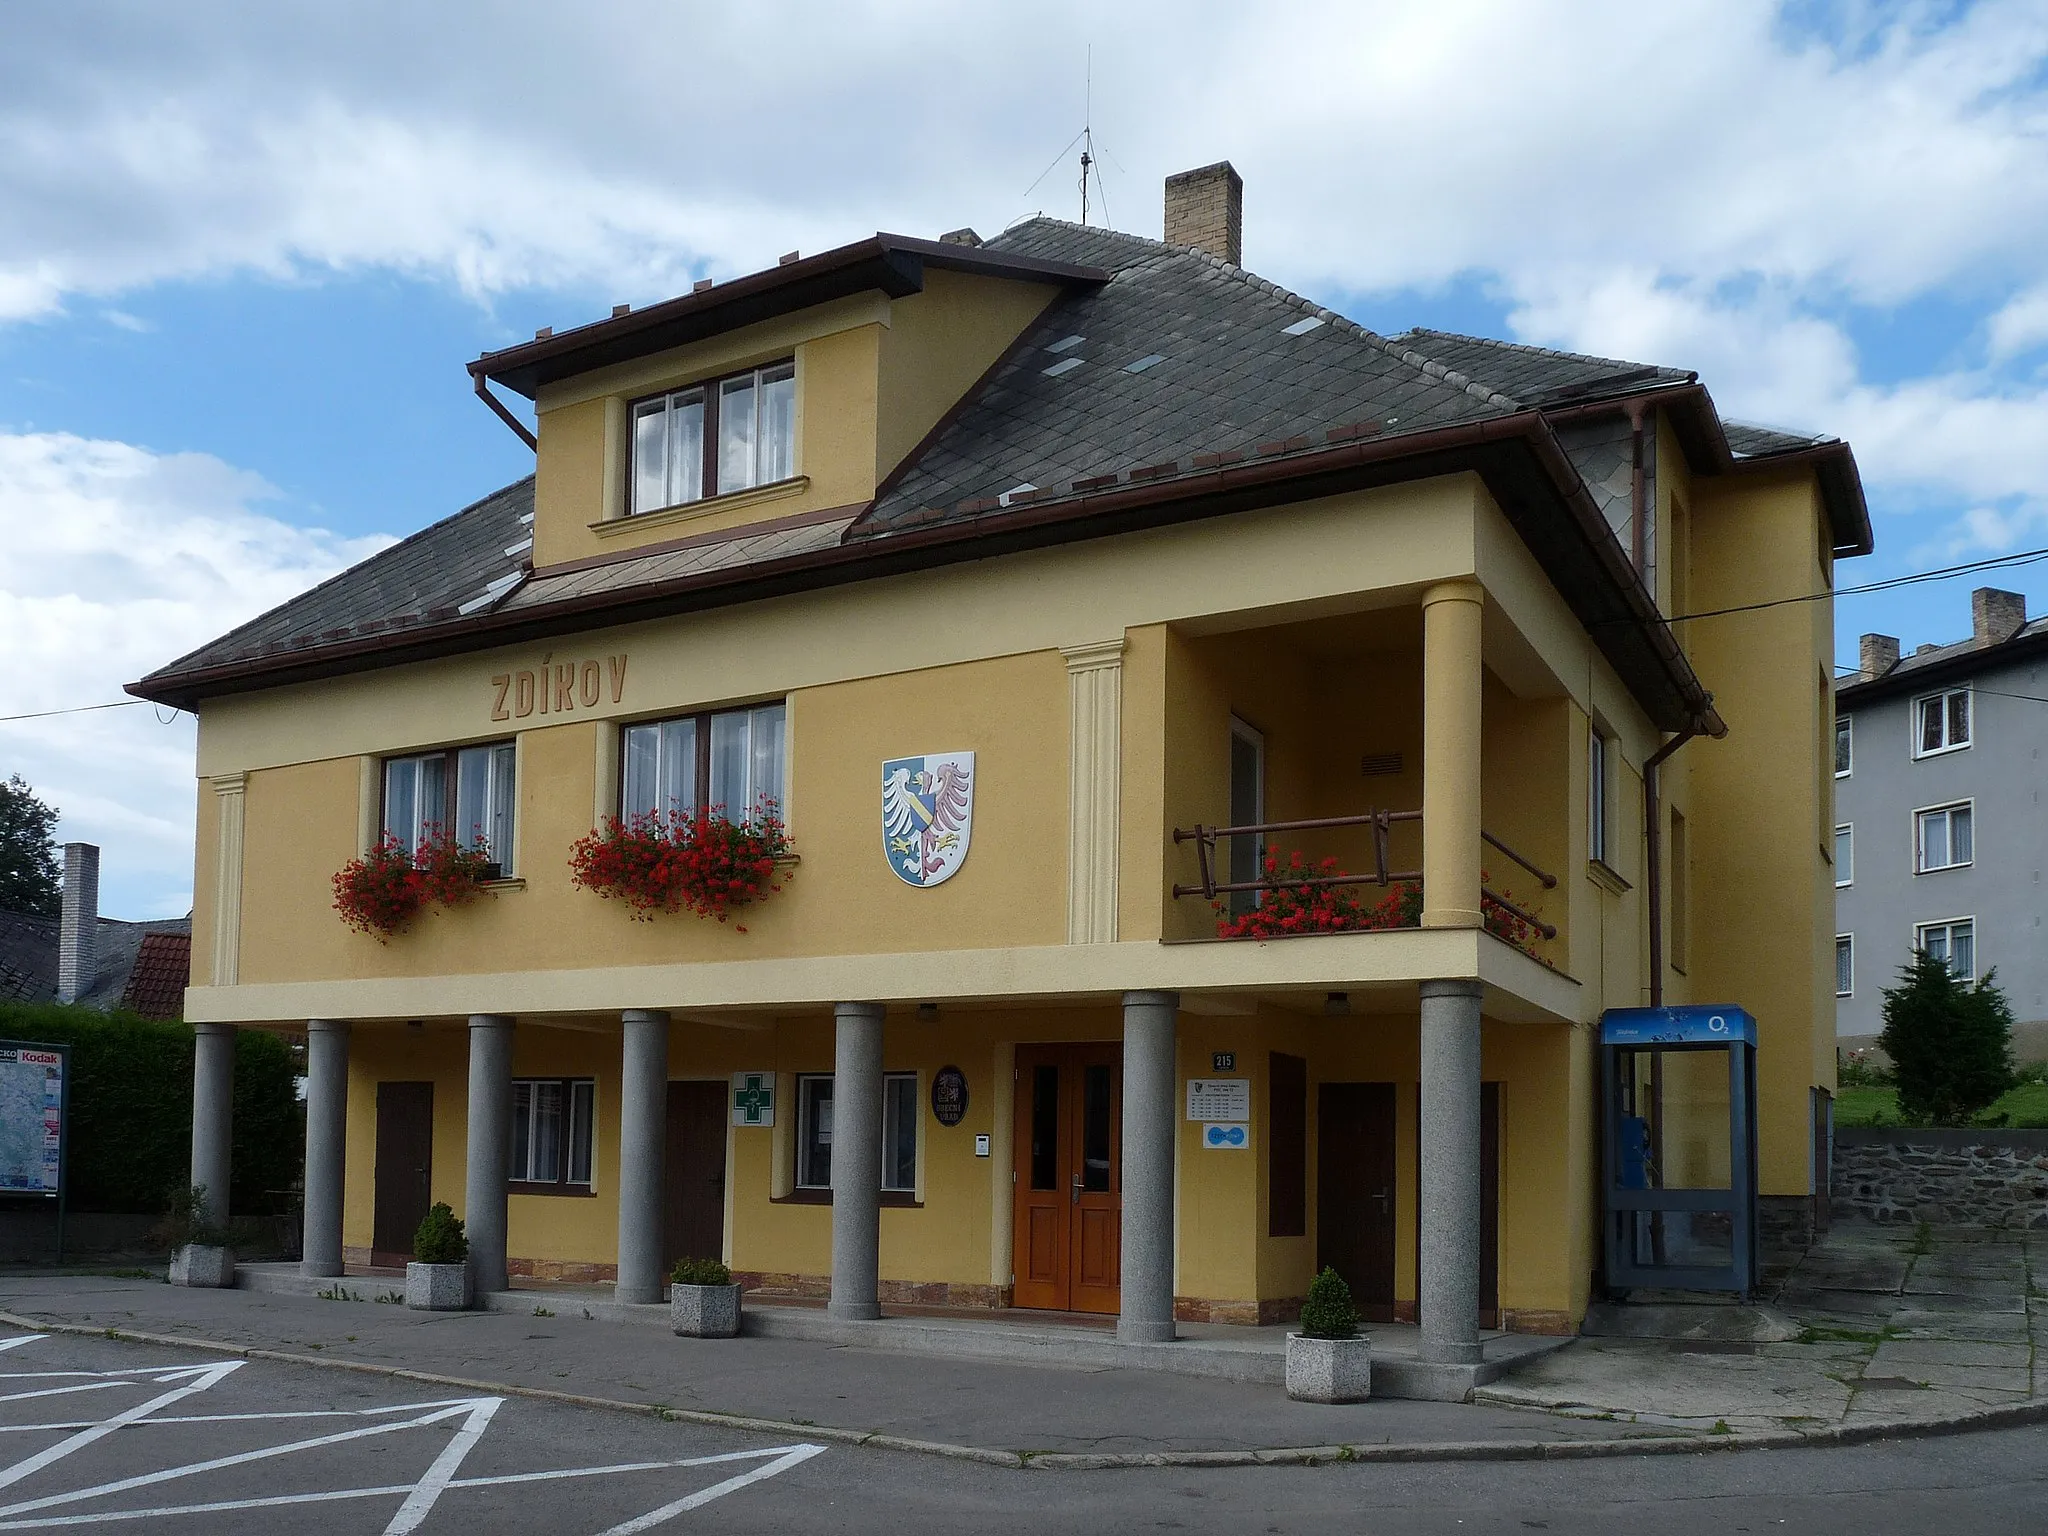 Photo showing: Municipal office building in the village and municipality of Zdíkov in Prachatice District, Czech Republic.